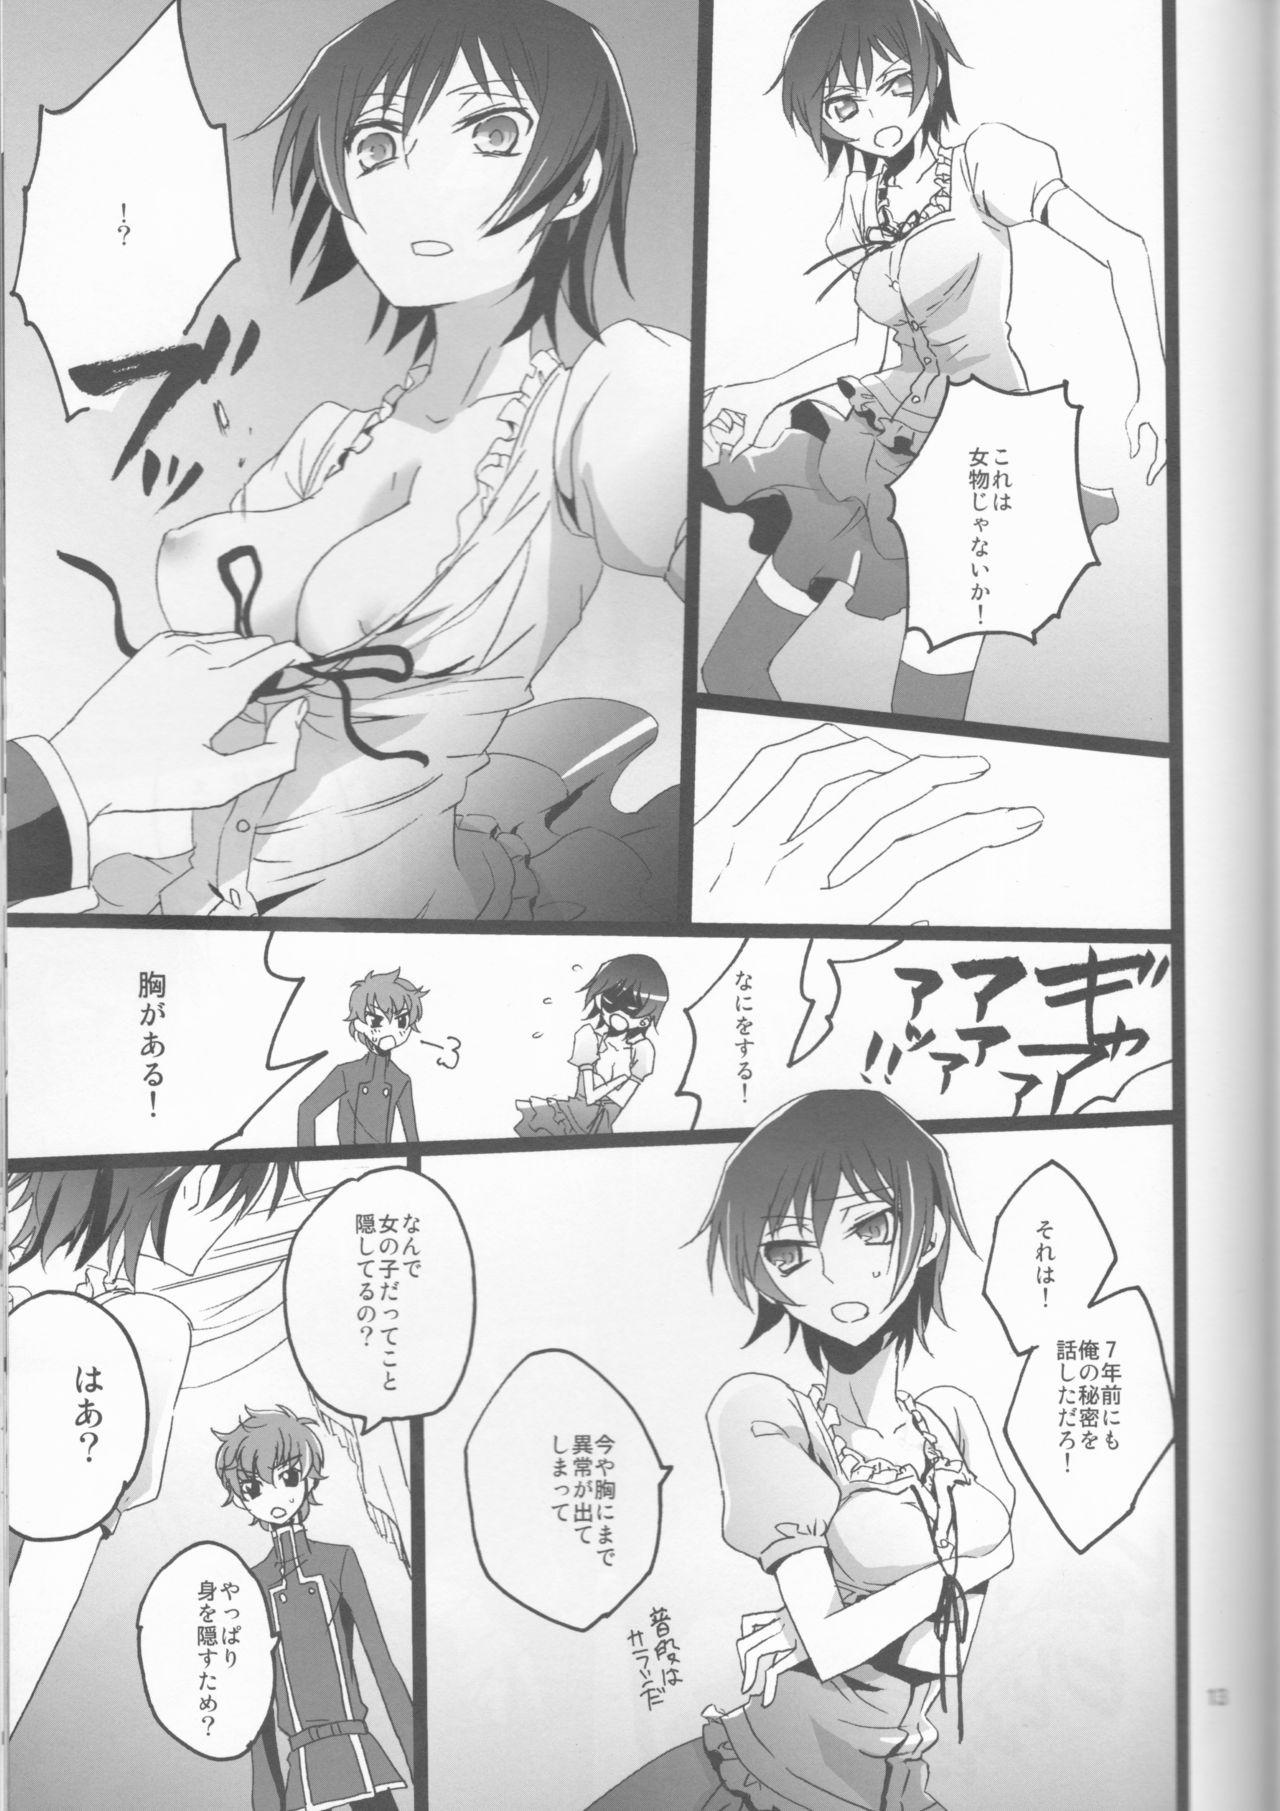 Pale Chameleon Girl - Code geass Gay Shorthair - Page 13